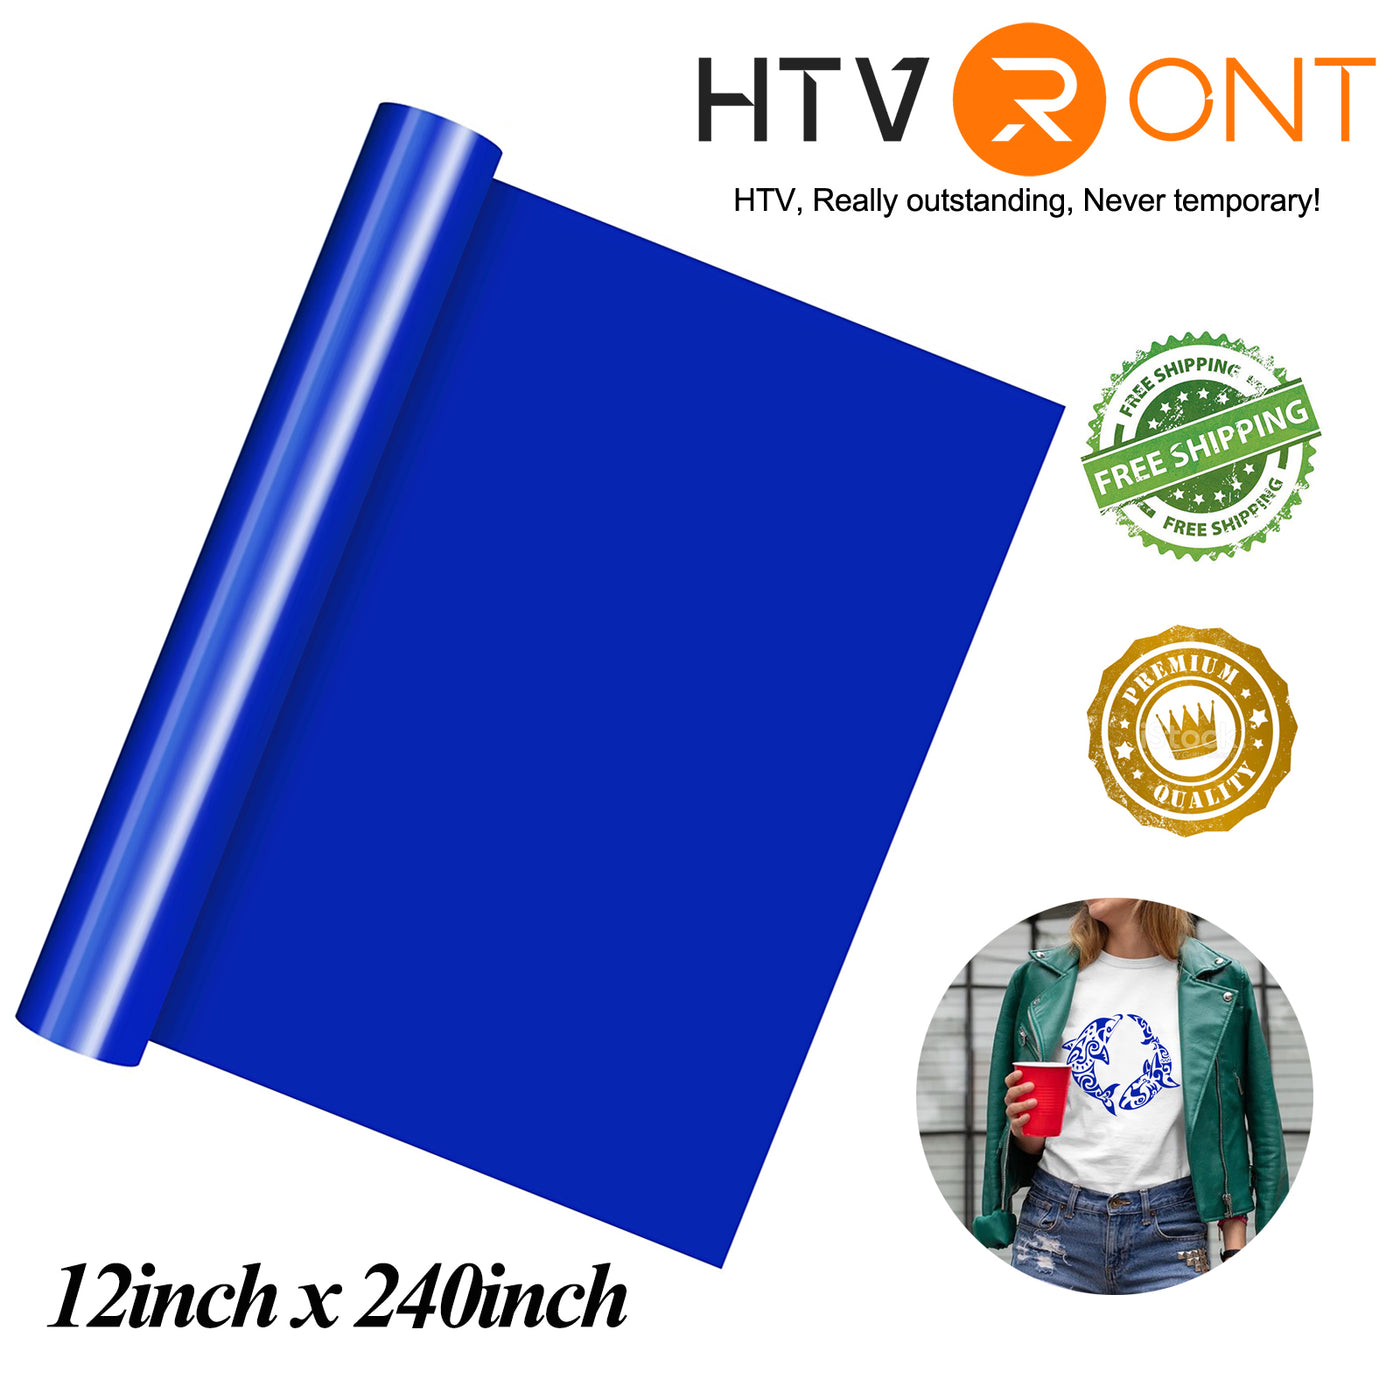 HTVRONT 12 x 15FT Heat Transfer Vinyl Royal Blue HTV Roll Iron on  T-Shirts, Clothing and Textiles for Cricut 